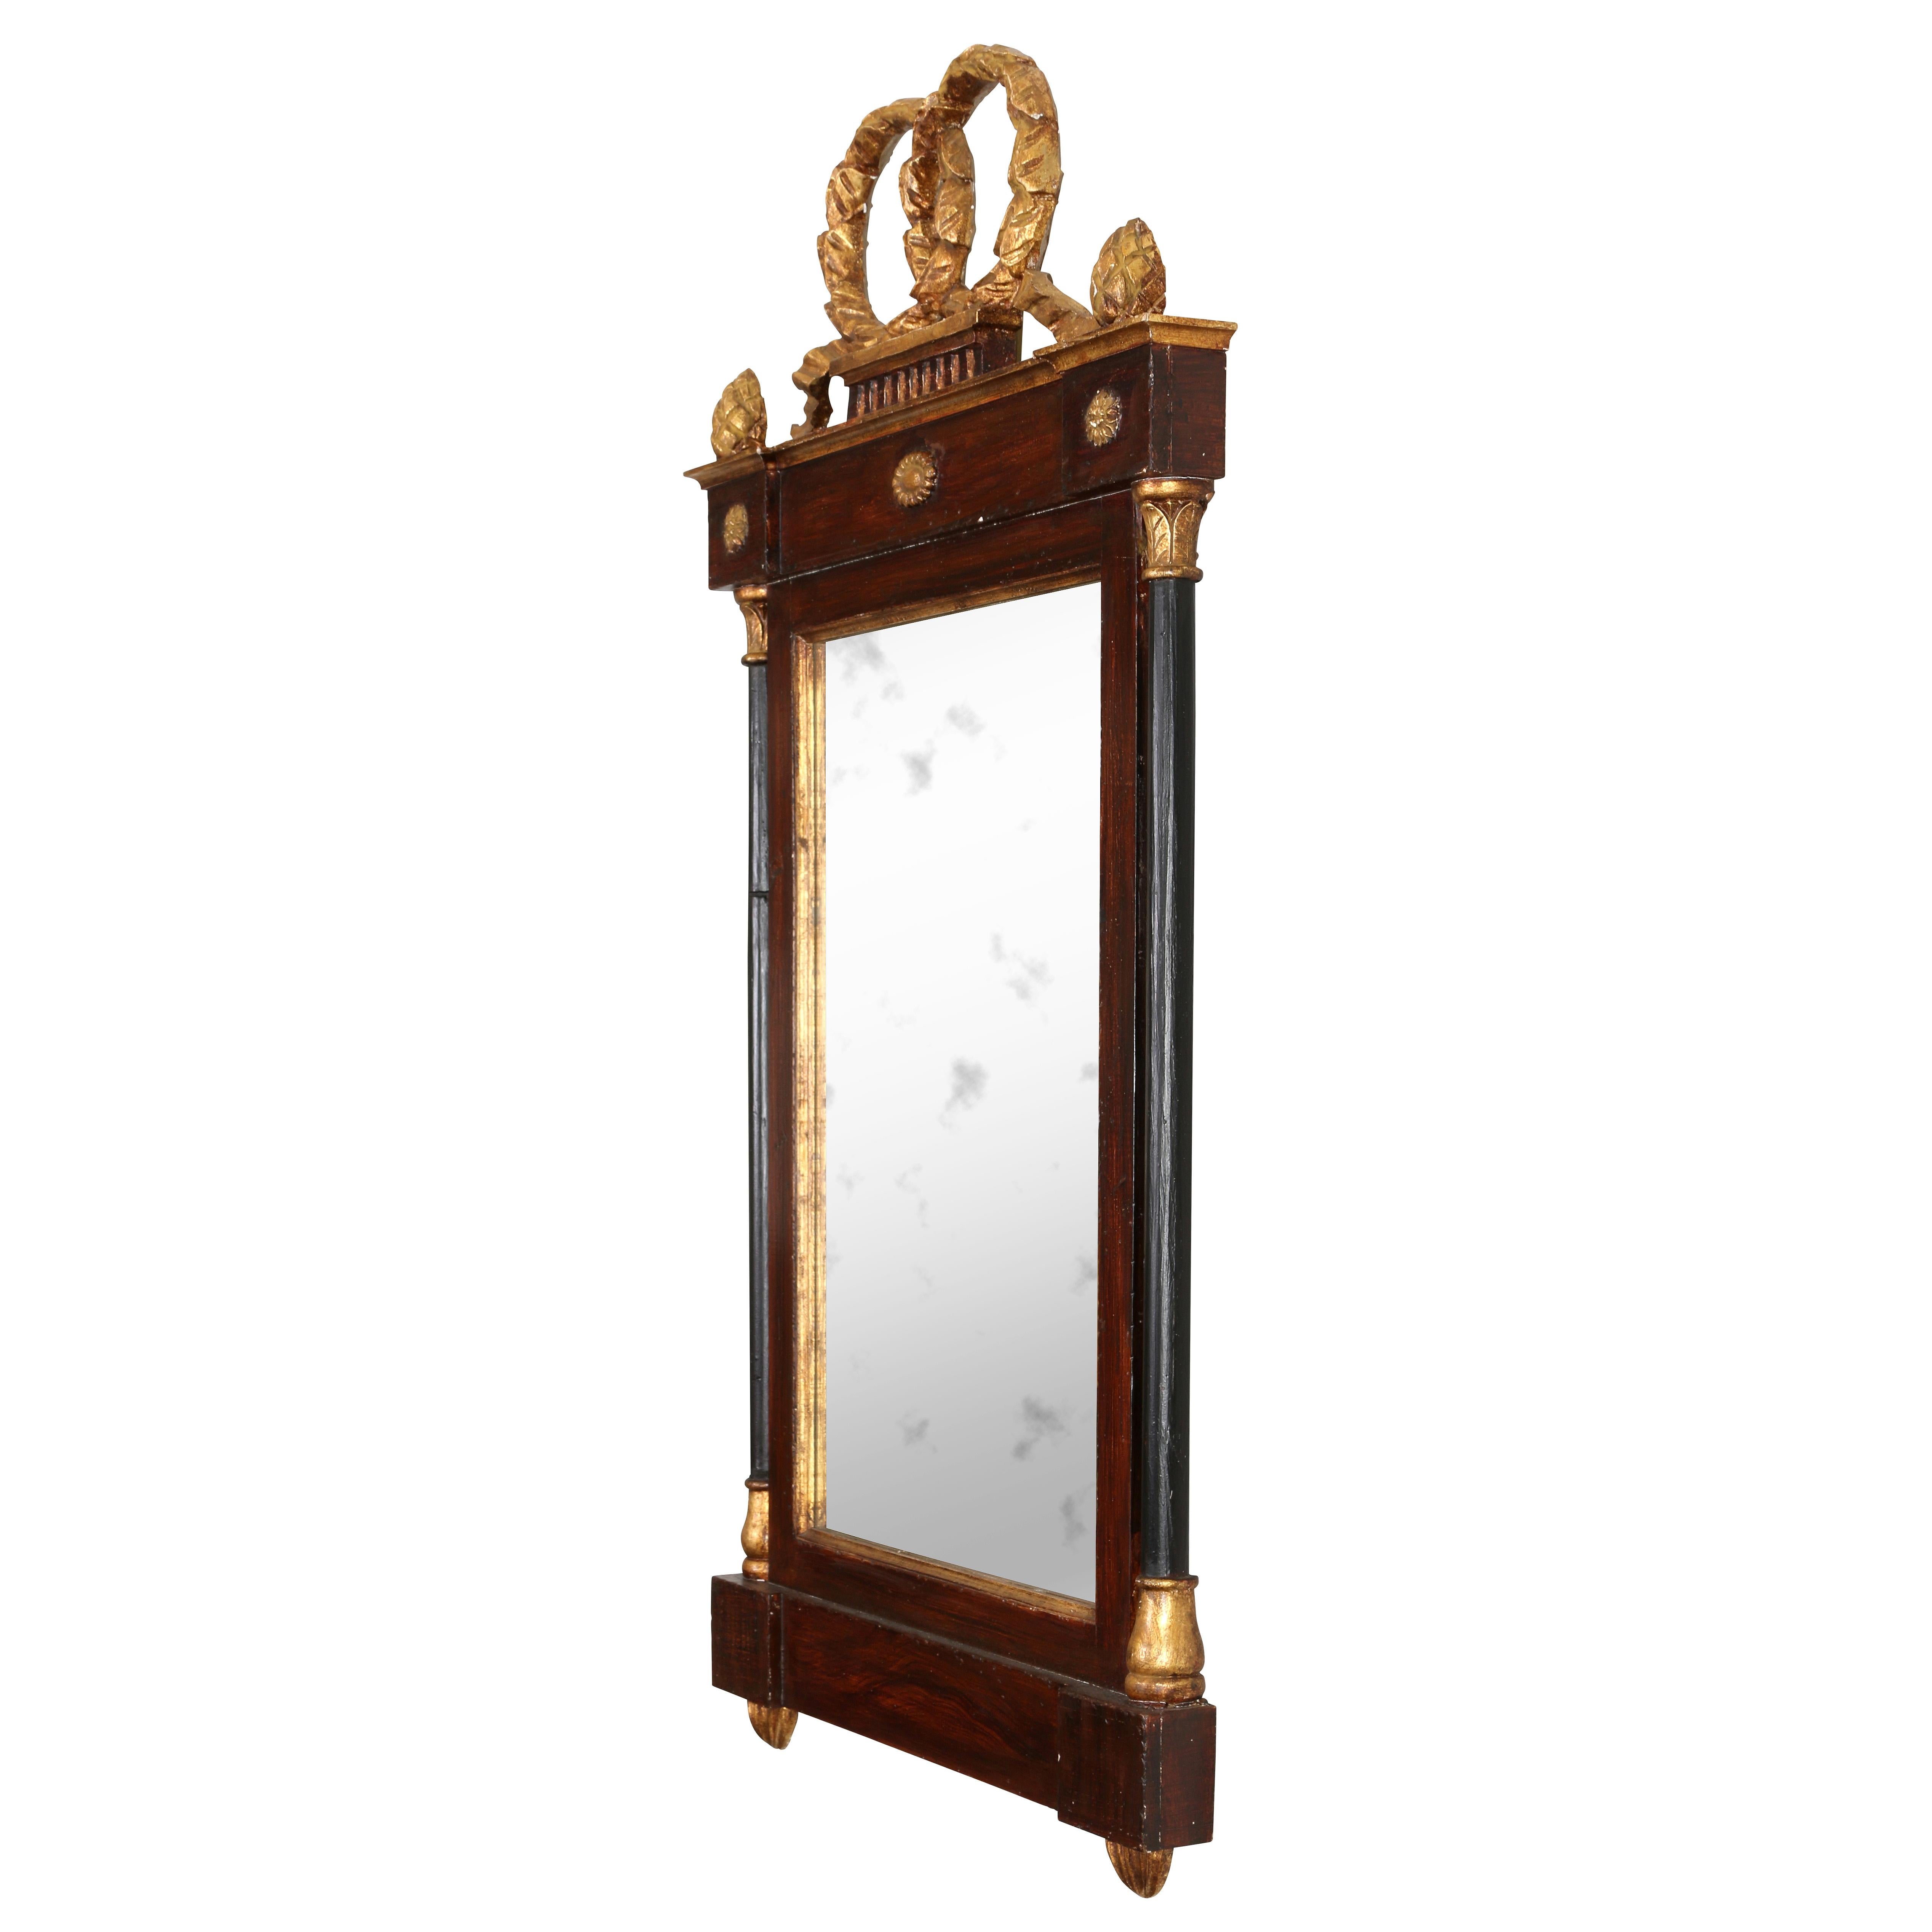 Two is always better than one! This is a great looking pair of 19th-century Italian mahogany mirrors in the Neoclassical style. Although the mirrors have a simple, understated style, they feature many lovely details, including gilt decorated